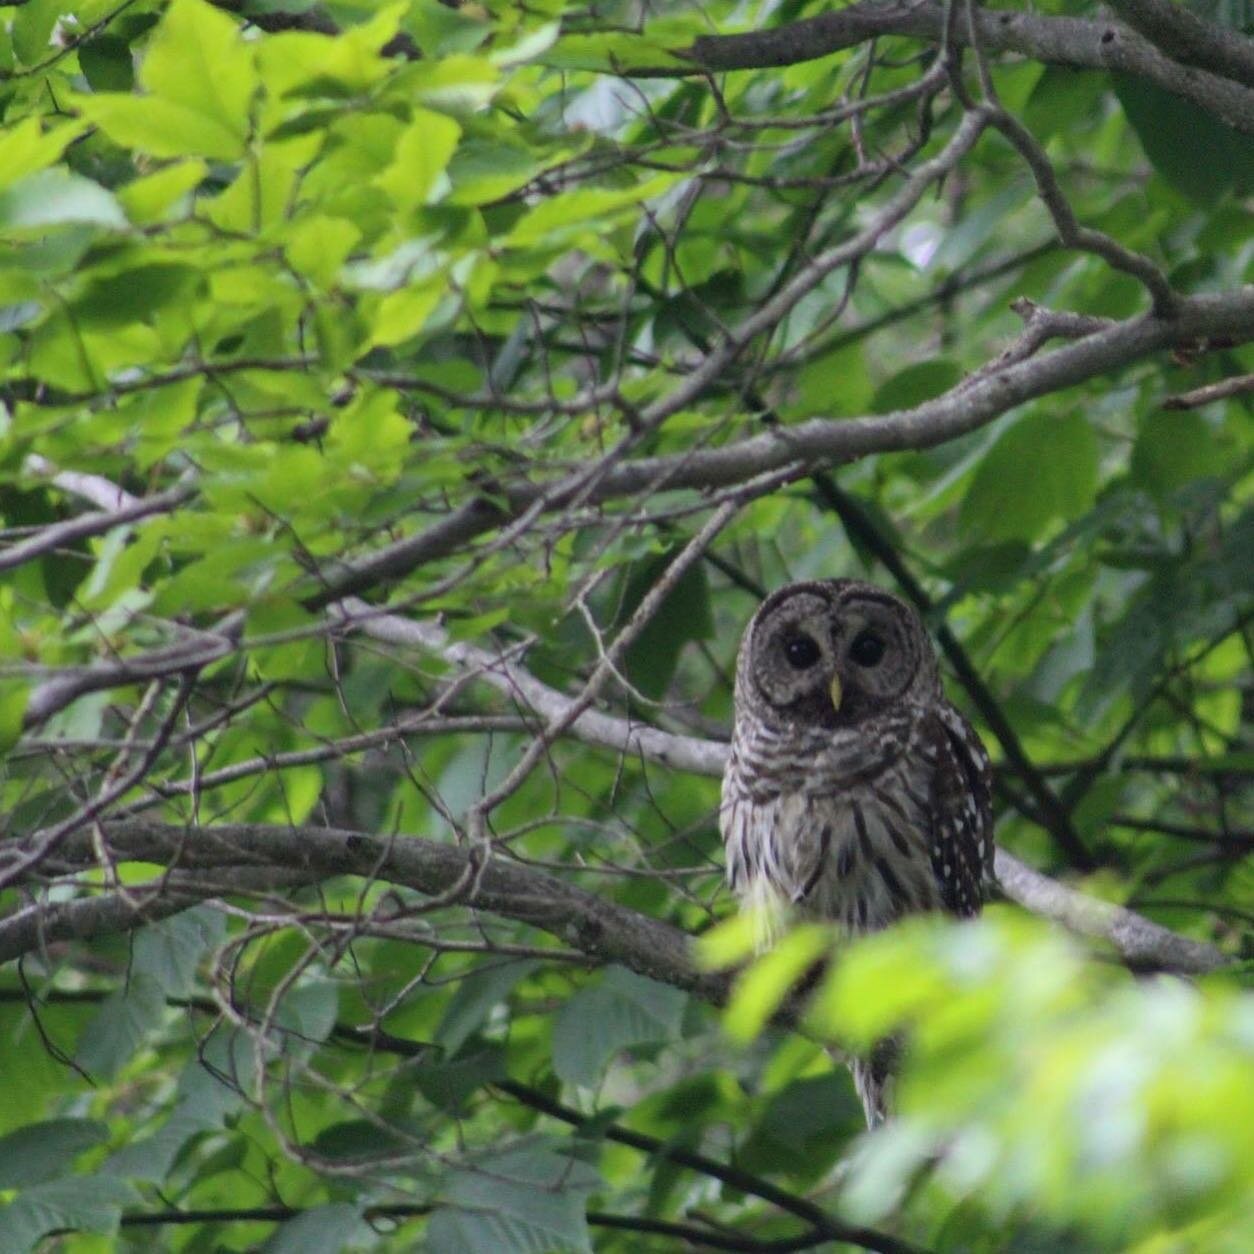 📸Watershed wildlife photo submitted by Rhonda Fox📸

A barred owl (Strix varia) rests under tree cover along the Neversink River near Hunter Road. Barred owls prefer dense wooded areas often near rivers or marshy areas. Barred owls are selective, bu